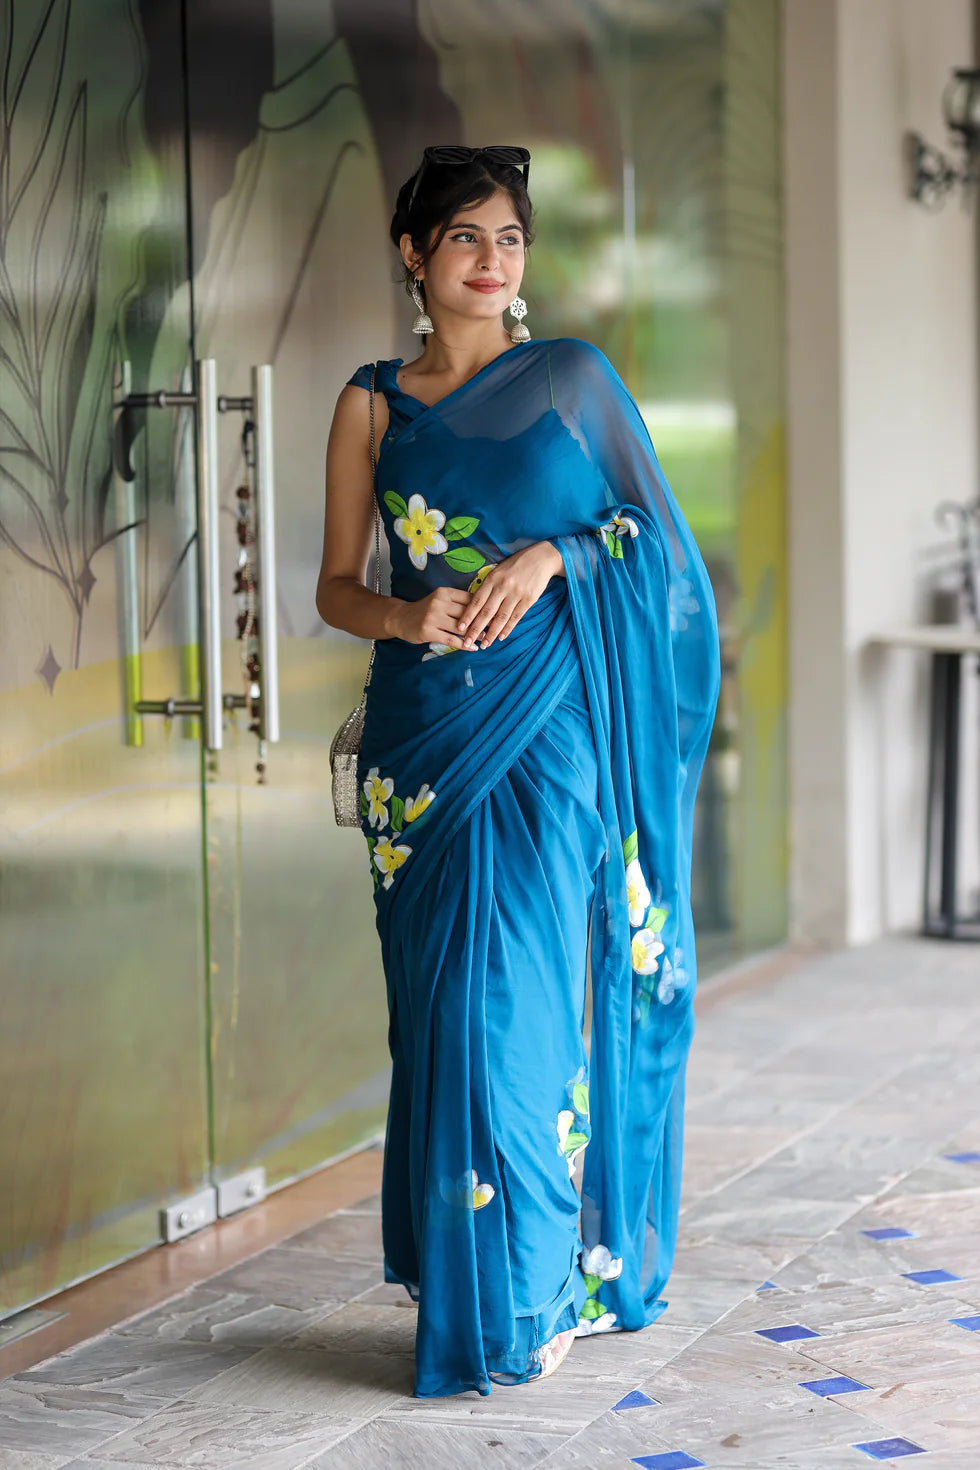 Elevate Your Style: The Latest Saree Trends Taking 2024 by Storm